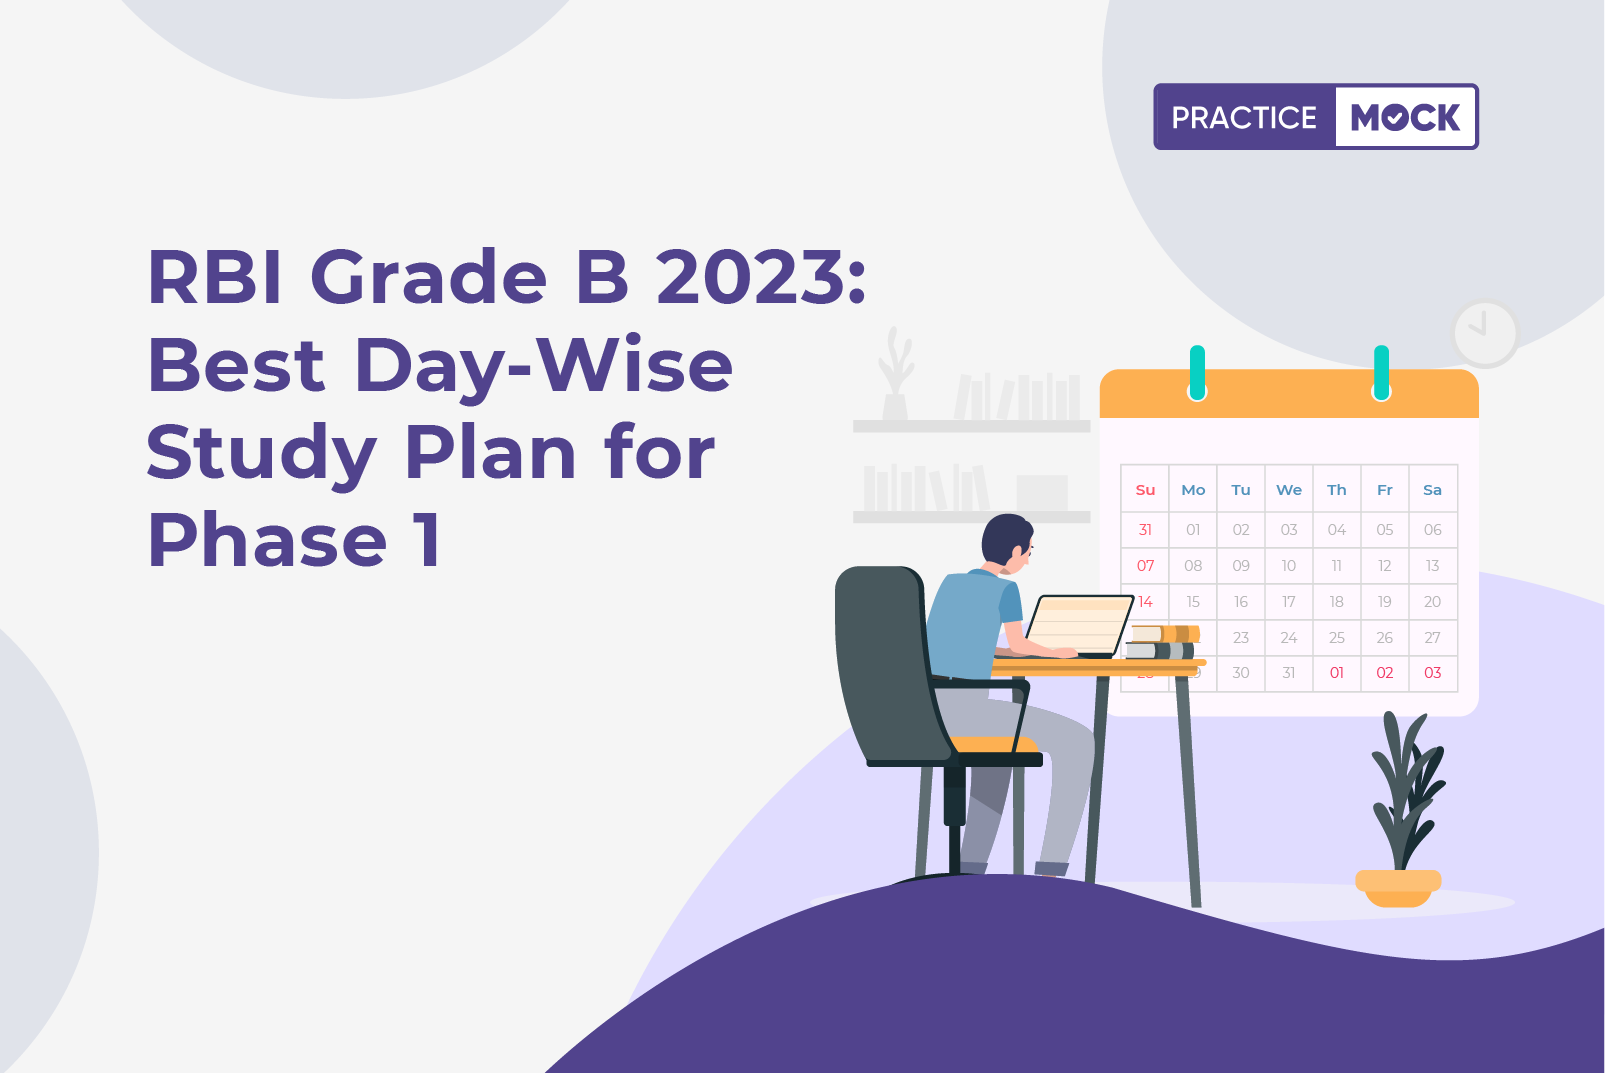 RBI Grade B 2023 Best Day-Wise Study Plan for Phase 1